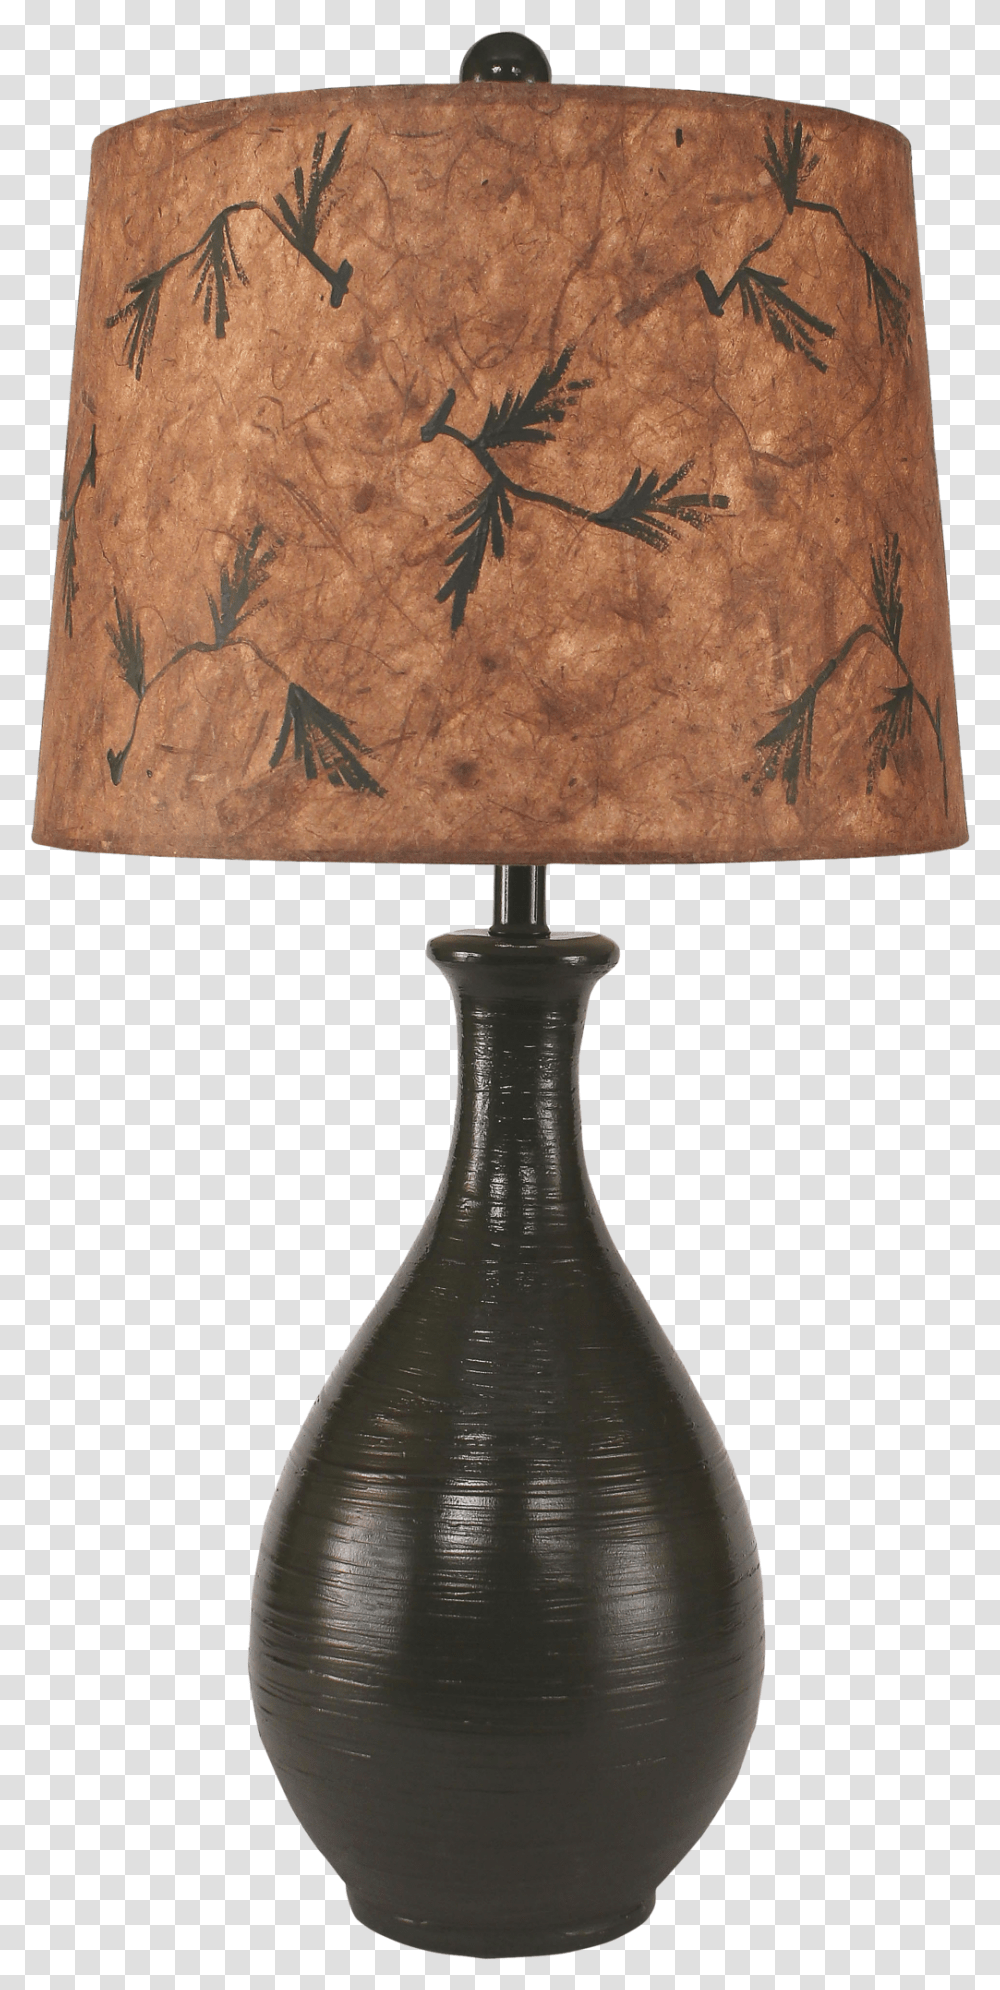 Avacado Ridged Tear Drop Table Lamp W Pine Branch Lampshade Transparent Png